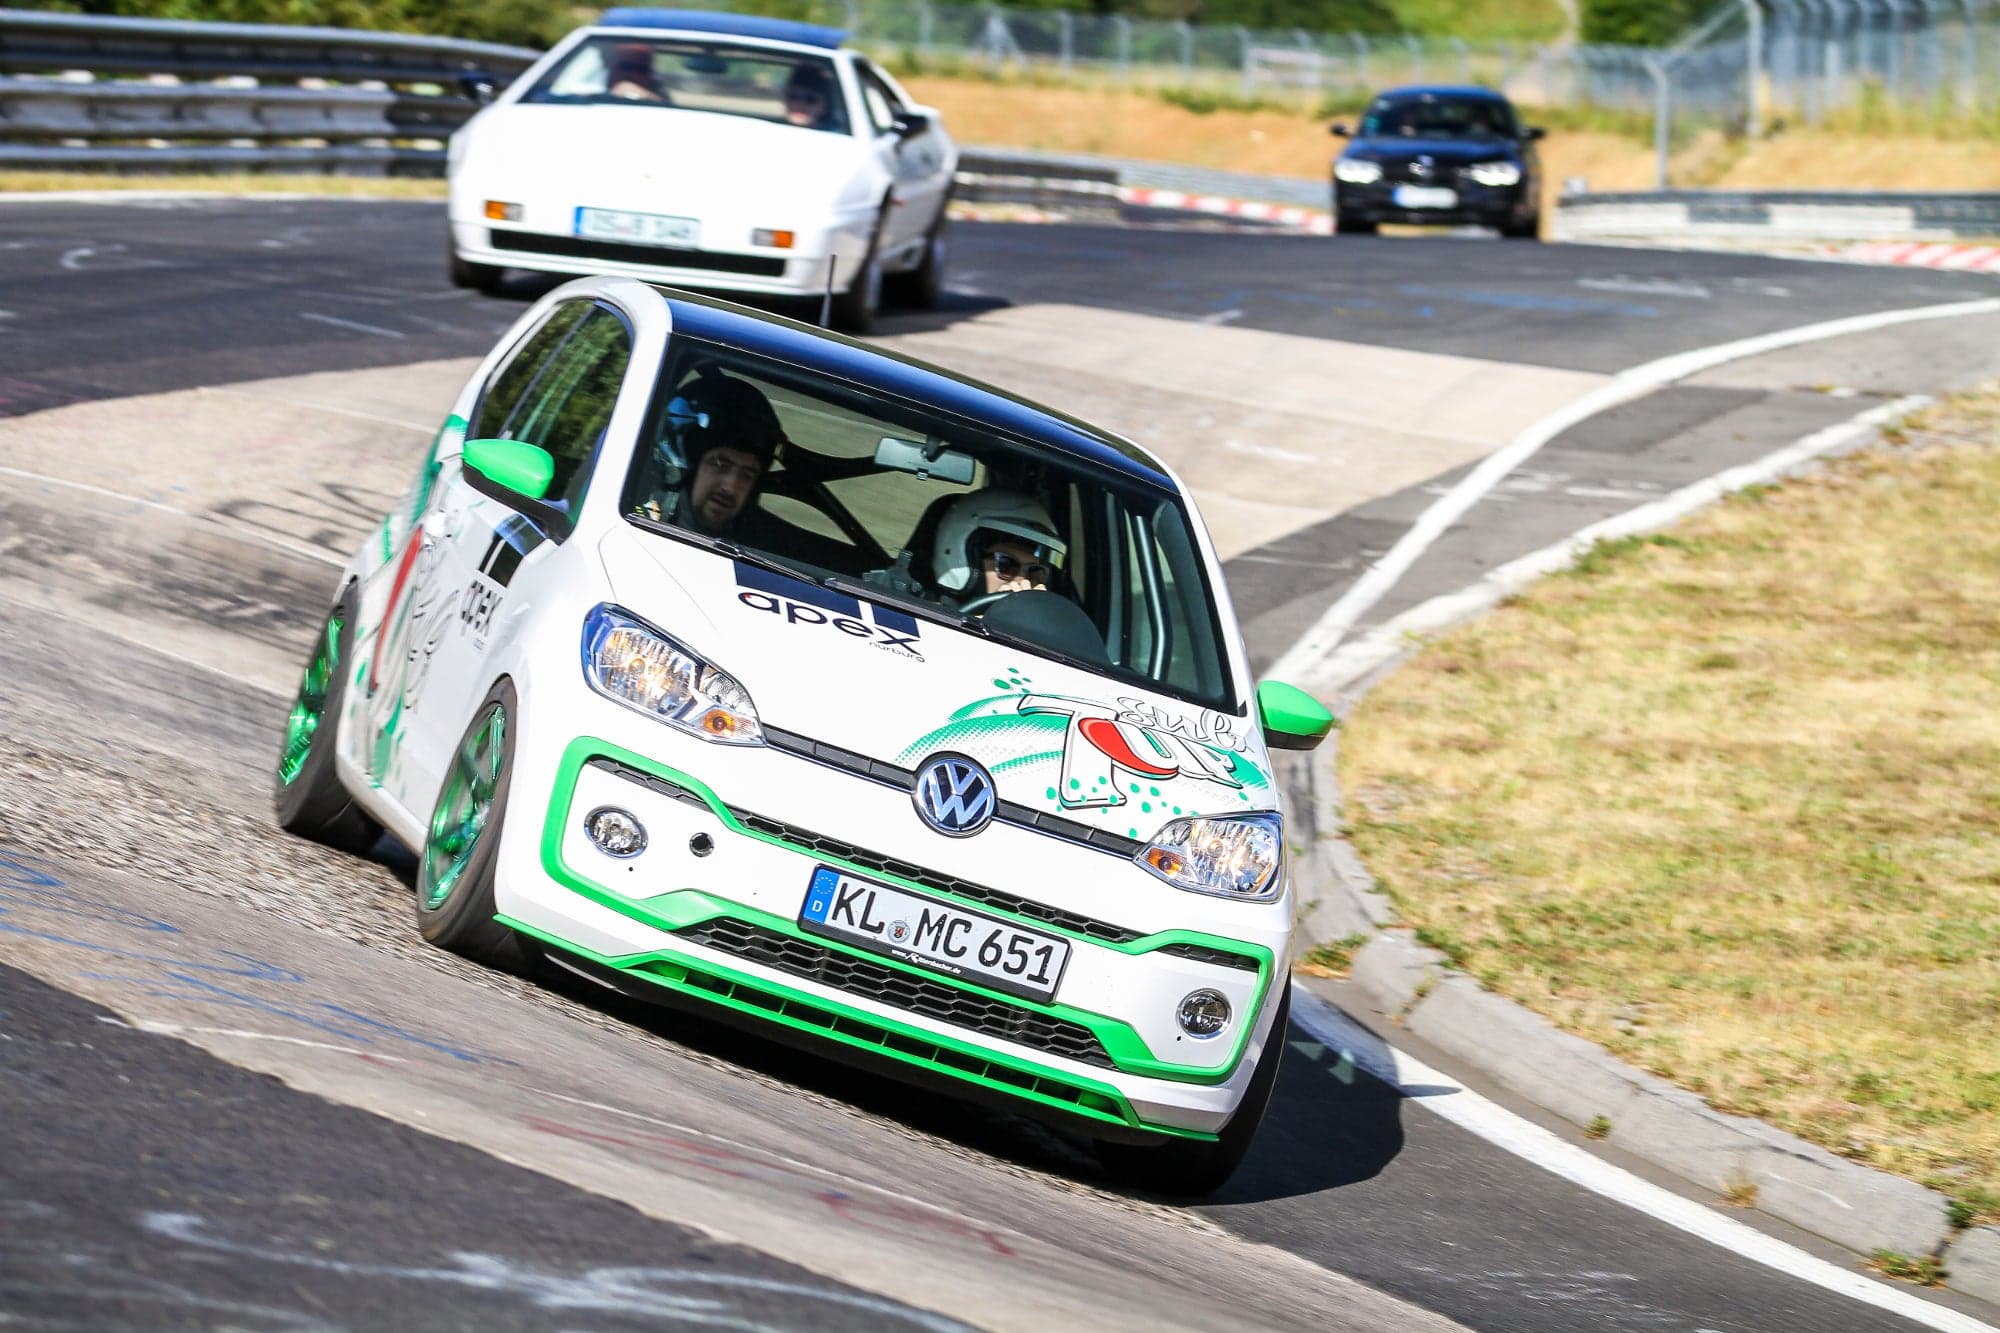 Volkswagen’s Tiniest Car Is All You Need To Terrify Yourself On The Nürburgring